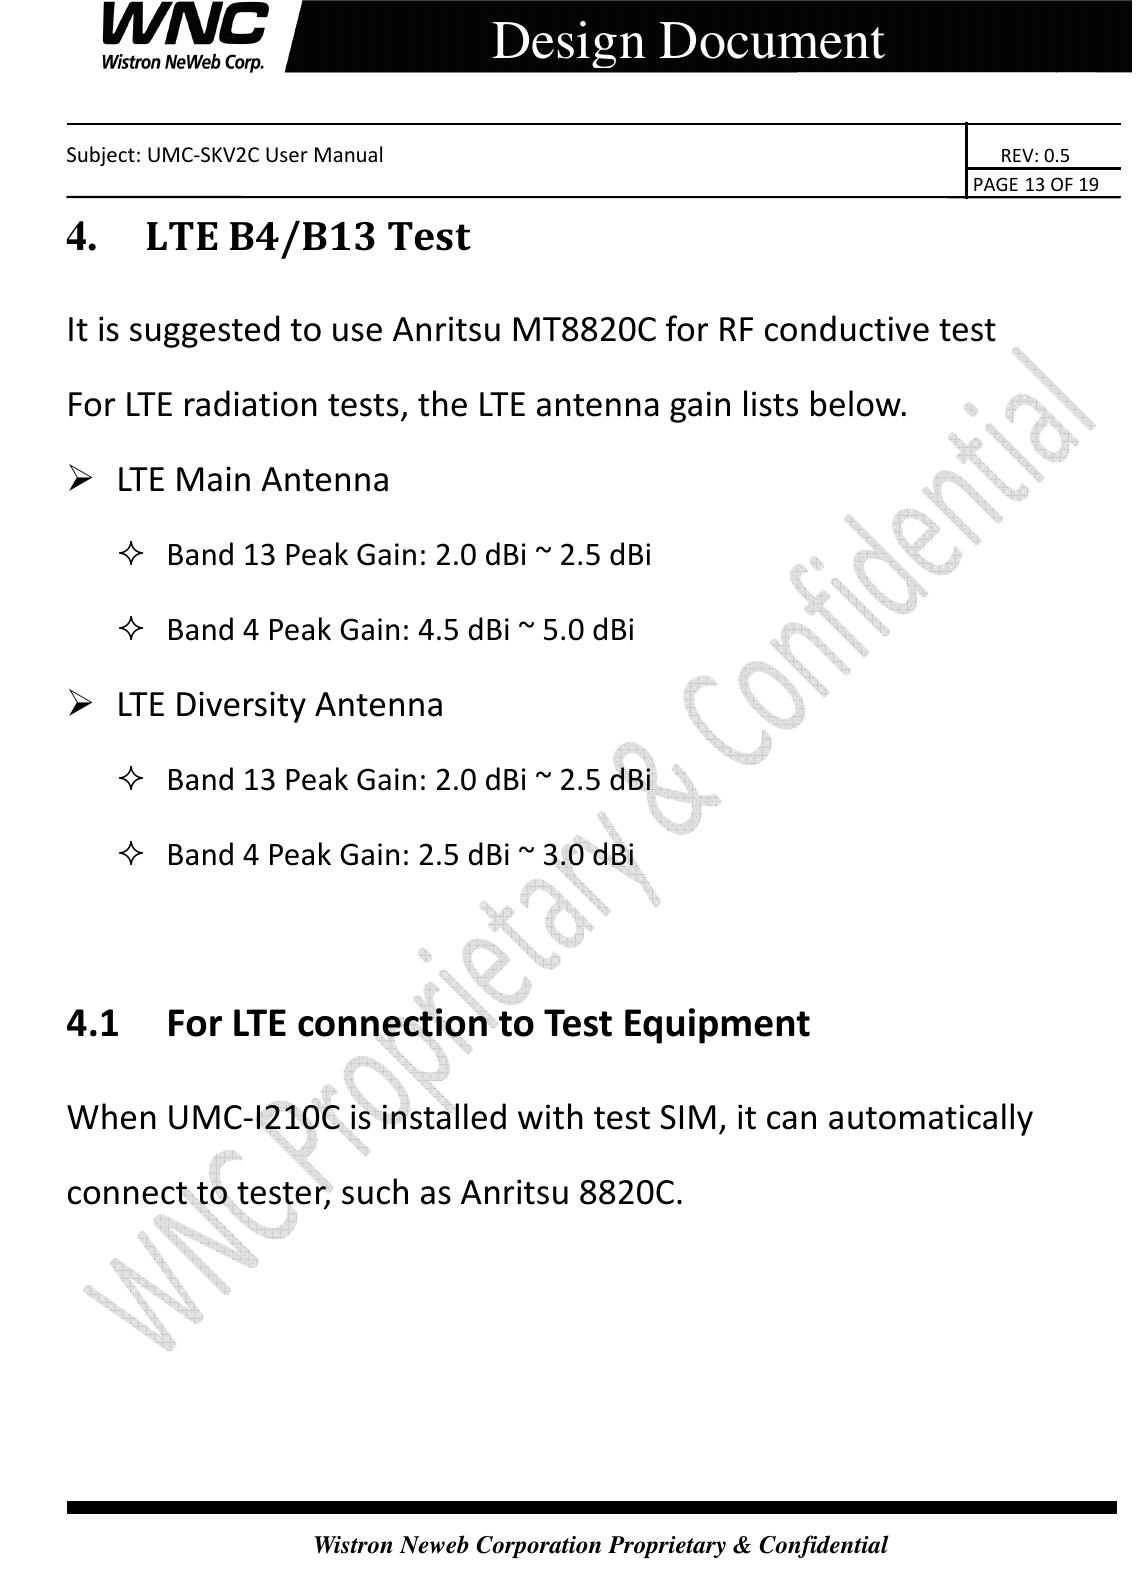    Subject: UMC-SKV2C User Manual                                                                       REV: 0.5                                                                                                                                                                               PAGE 13 OF 19  Wistron Neweb Corporation Proprietary &amp; Confidential     Design Document 4.     LTE B4/B13 Test It is suggested to use Anritsu MT8820C for RF conductive test For LTE radiation tests, the LTE antenna gain lists below.  LTE Main Antenna    Band 13 Peak Gain: 2.0 dBi ~ 2.5 dBi    Band 4 Peak Gain: 4.5 dBi ~ 5.0 dBi    LTE Diversity Antenna    Band 13 Peak Gain: 2.0 dBi ~ 2.5 dBi    Band 4 Peak Gain: 2.5 dBi ~ 3.0 dBi    4.1 For LTE connection to Test Equipment When UMC-I210C is installed with test SIM, it can automatically connect to tester, such as Anritsu 8820C.    